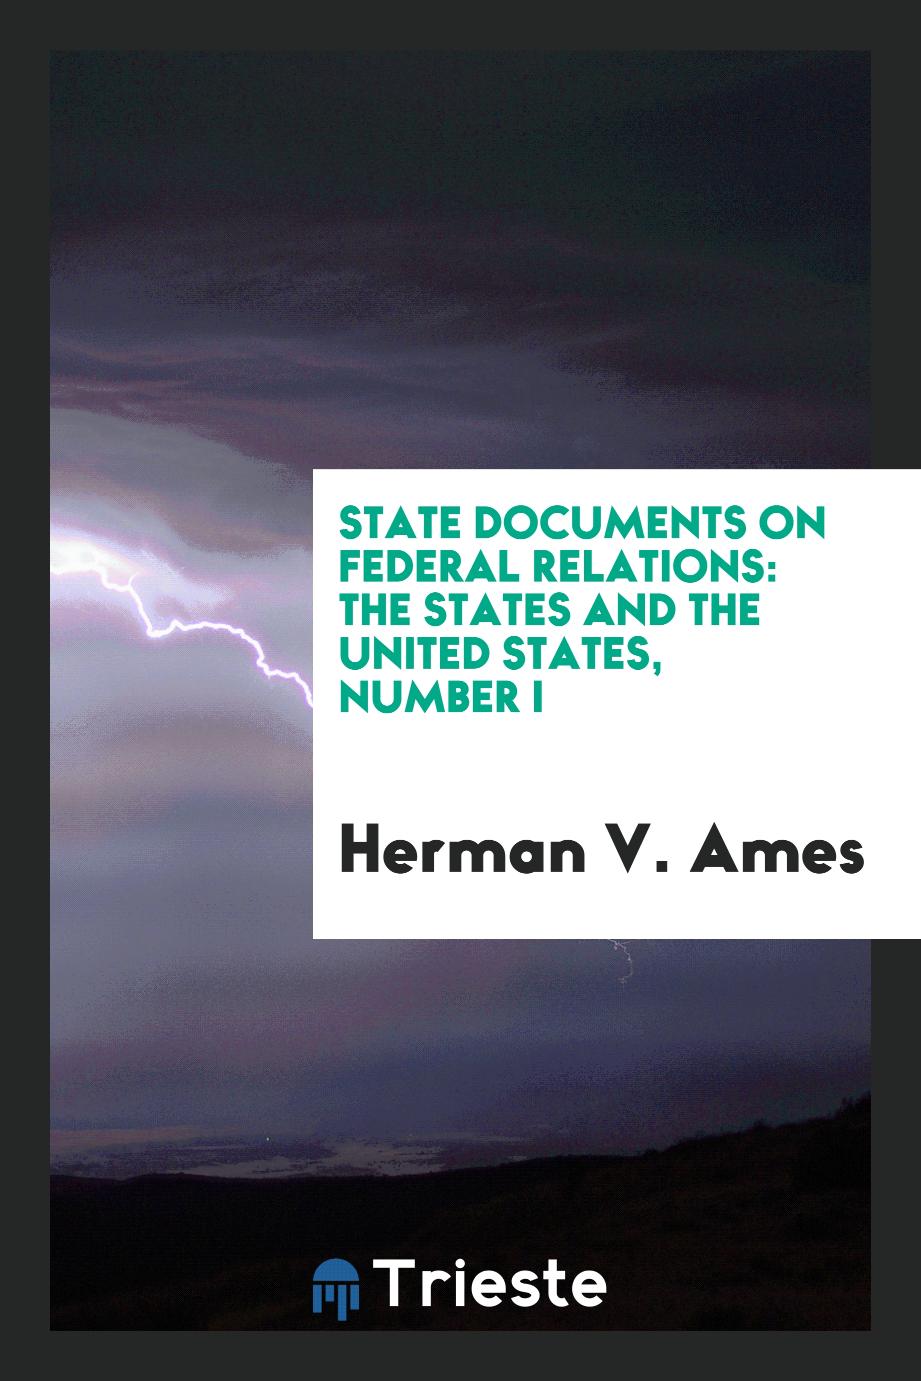 State documents on Federal relations: the States and the United States, Number I